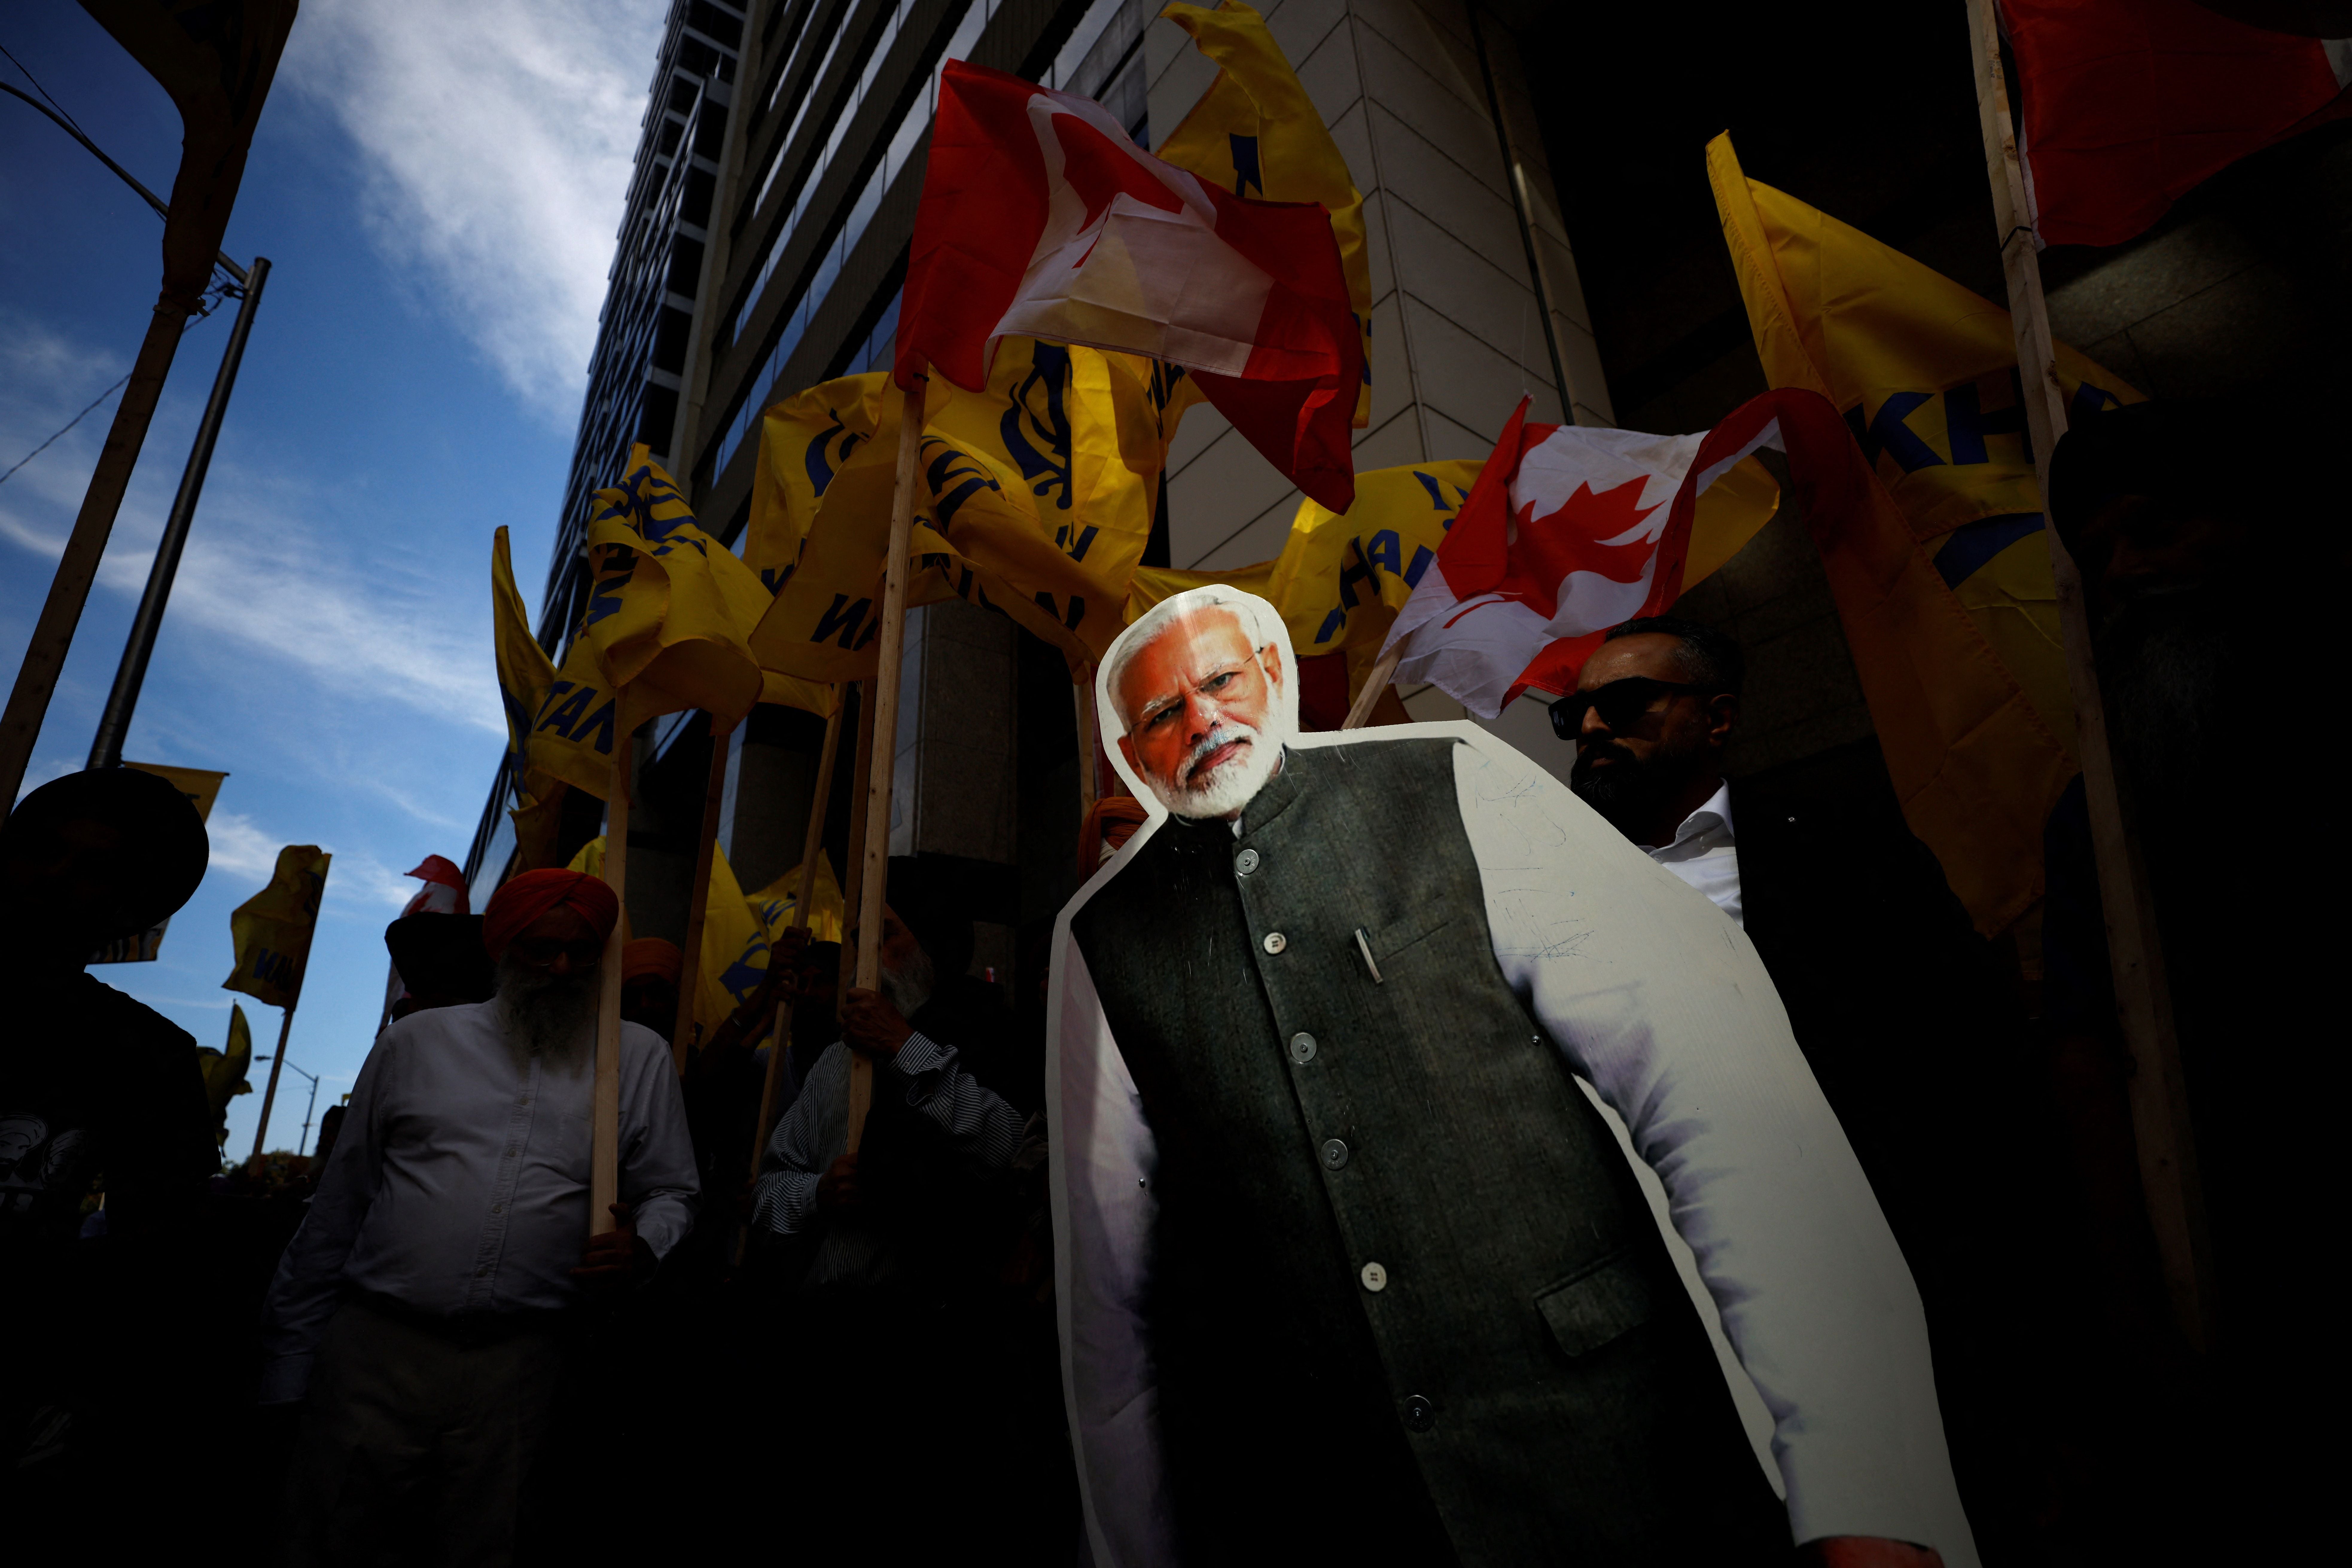 People hold a cutout depicting Indian prime minister Narendra Modi during a Sikh rally outside the Indian consulate a in Toronto